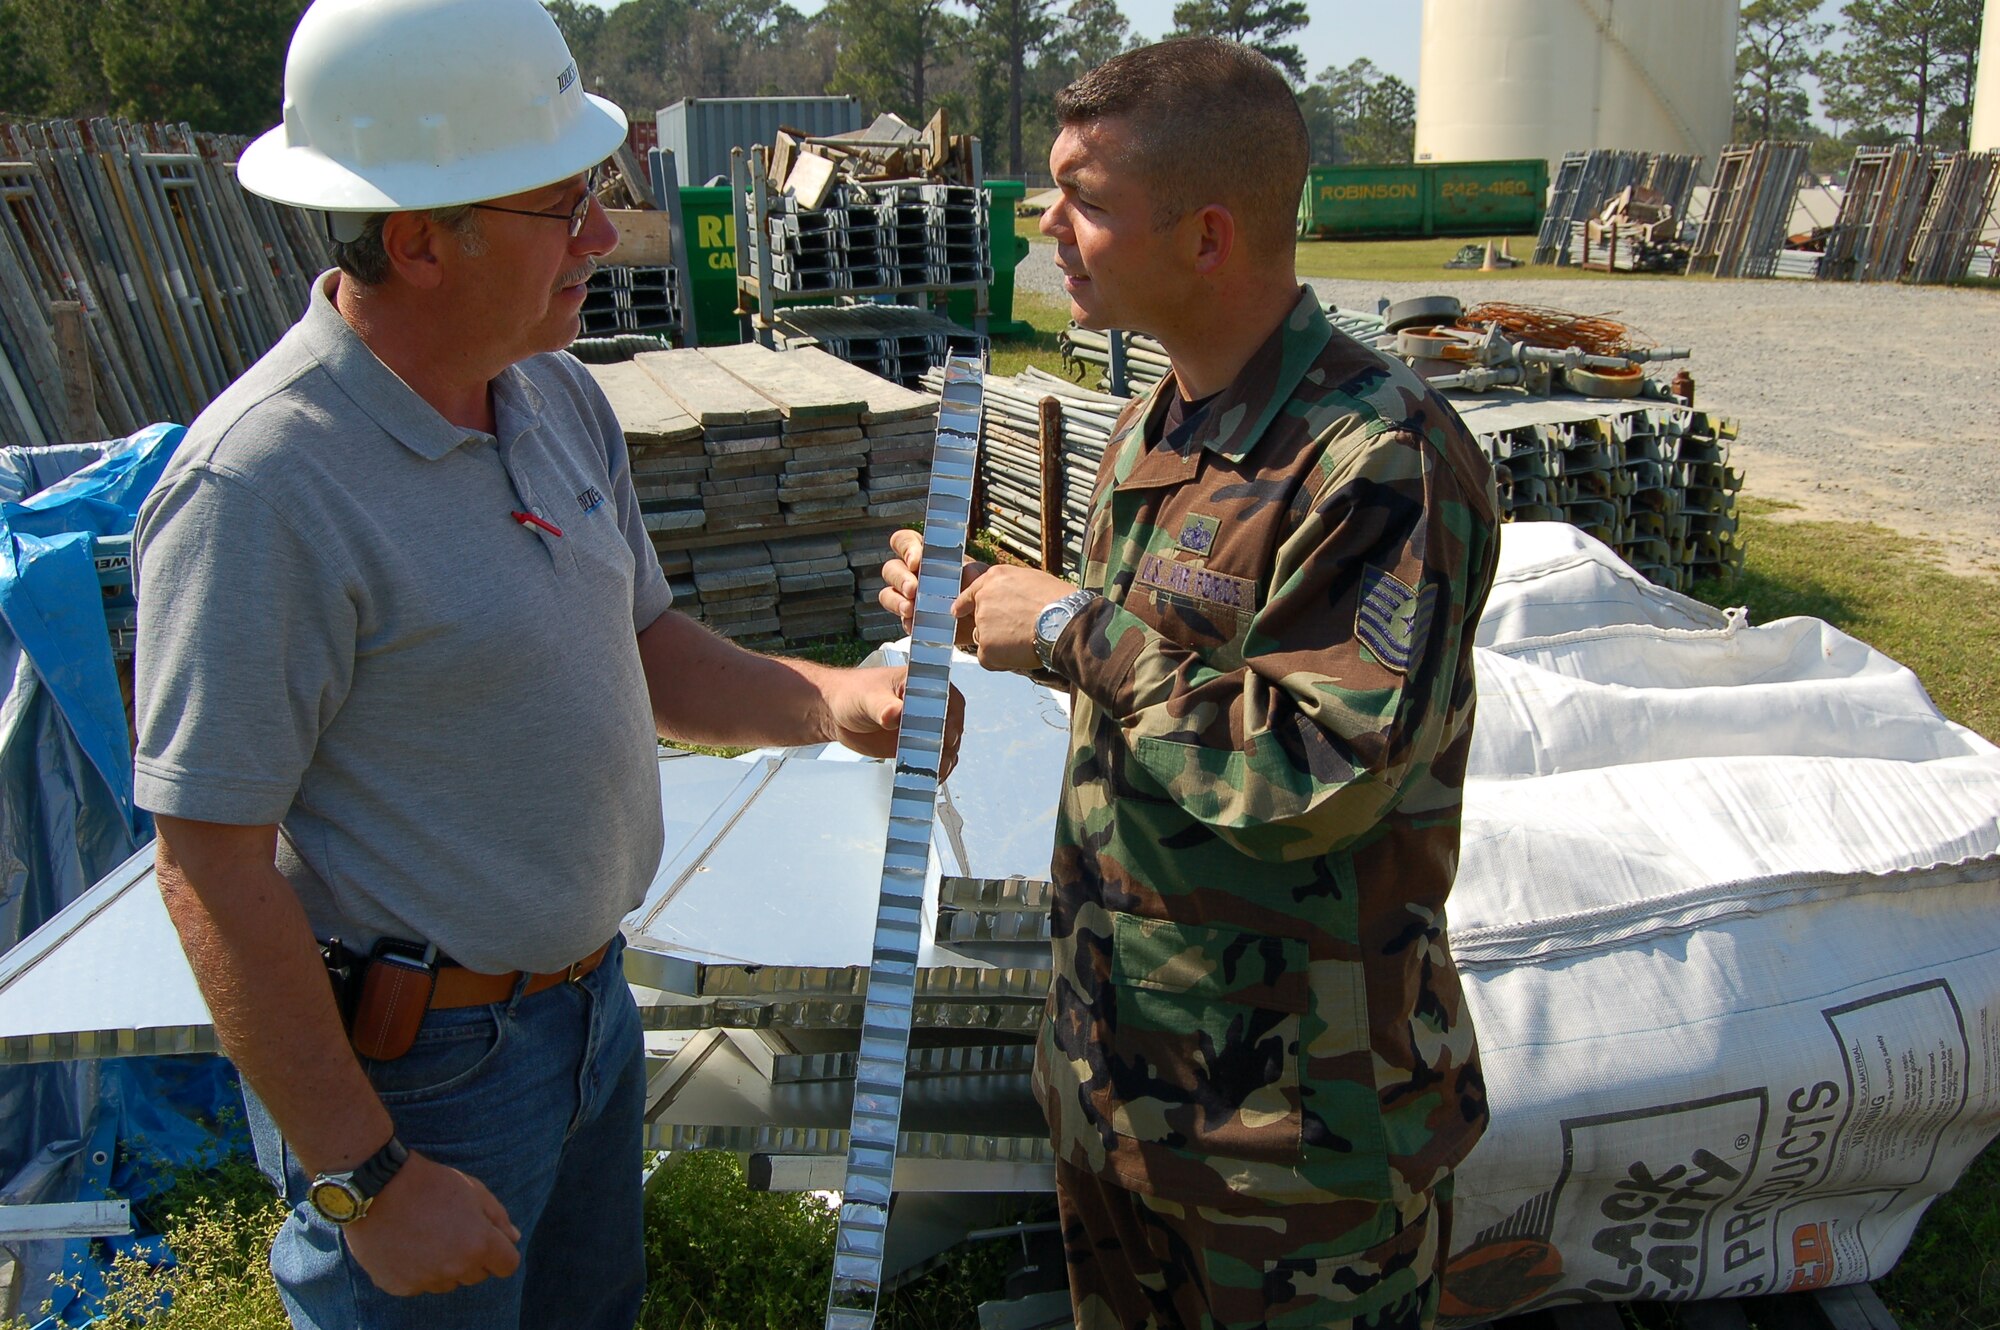 MOODY AIR FORCE BASE, Ga. -- Edd Hartman, site supervisor for TolTest Inc. shows Tech Sgt. Ron Killen, 23rd Logistic Readiness Squadron fuels storage element assistant NCO-in-charge, a cross section of the floating roof that seals fuel in 5,000 and 10,000-barrel tanks. (U.S. Air Force photo by Tech. Sgt. Parker Gyokeres)